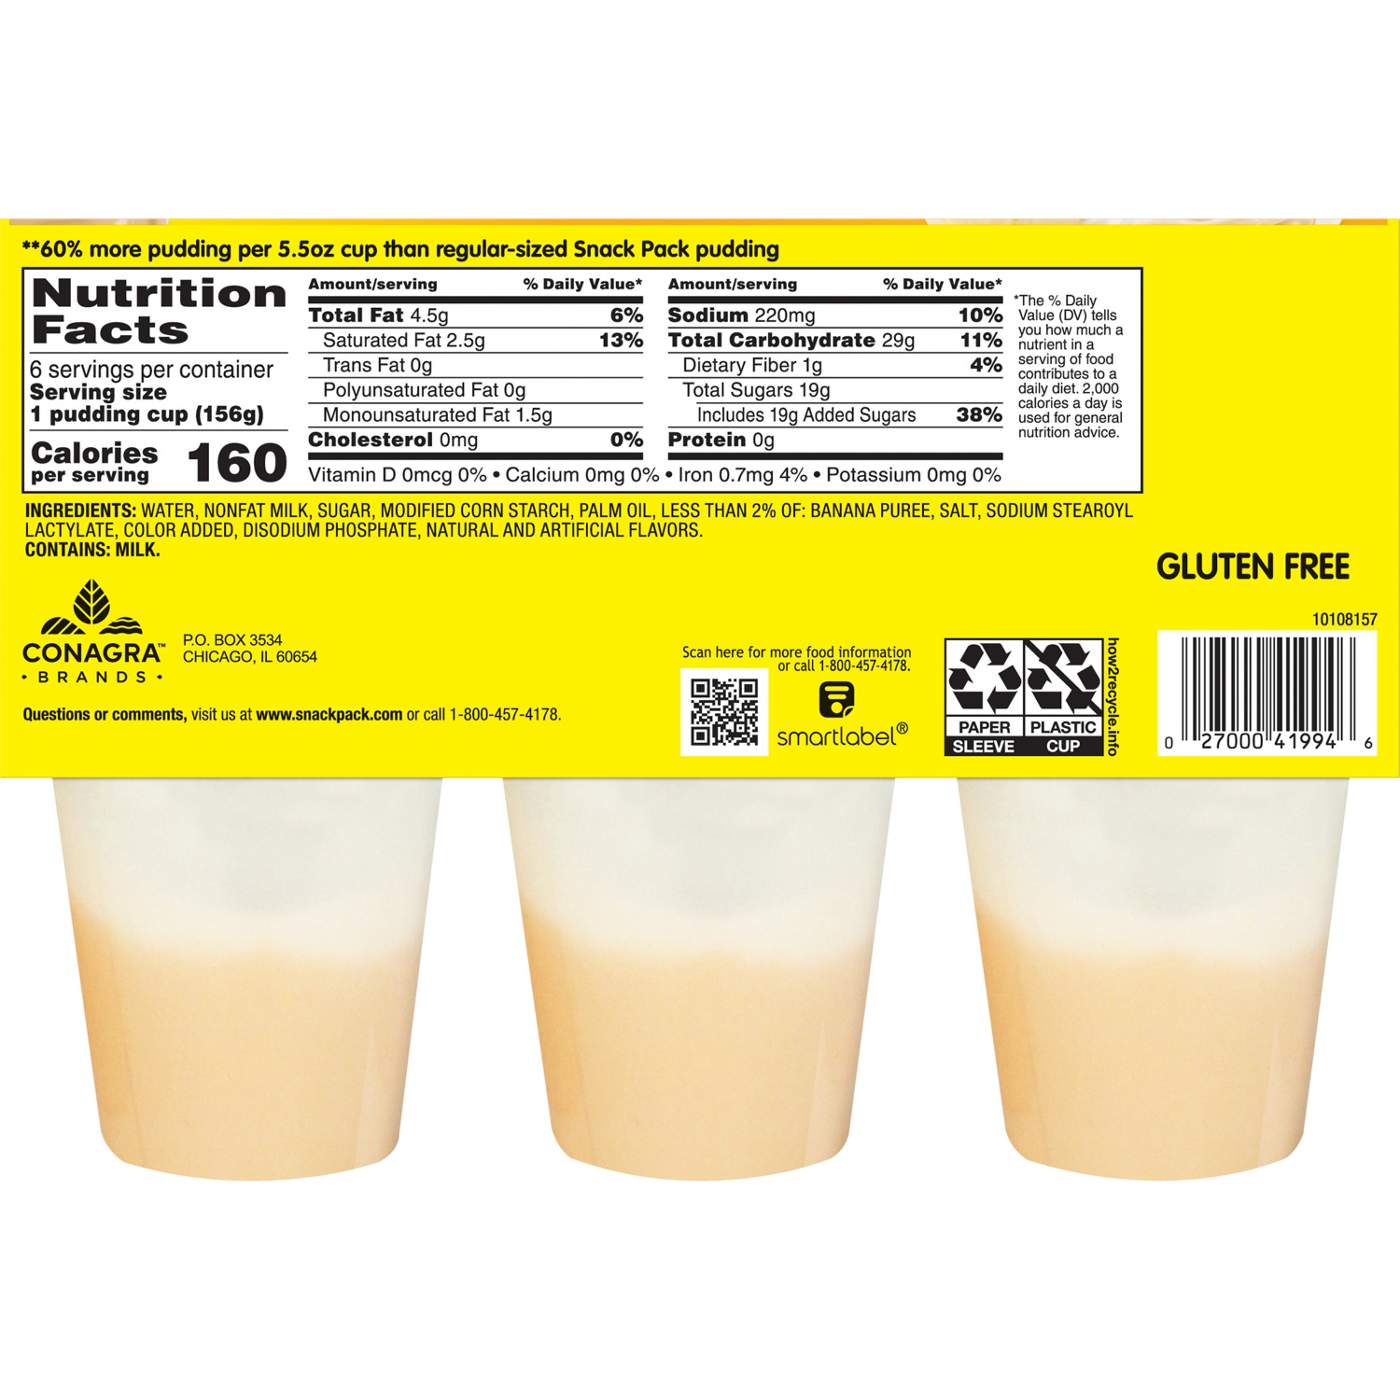 Snack Pack Super Size Banana Cream Pie Pudding Cups; image 6 of 7